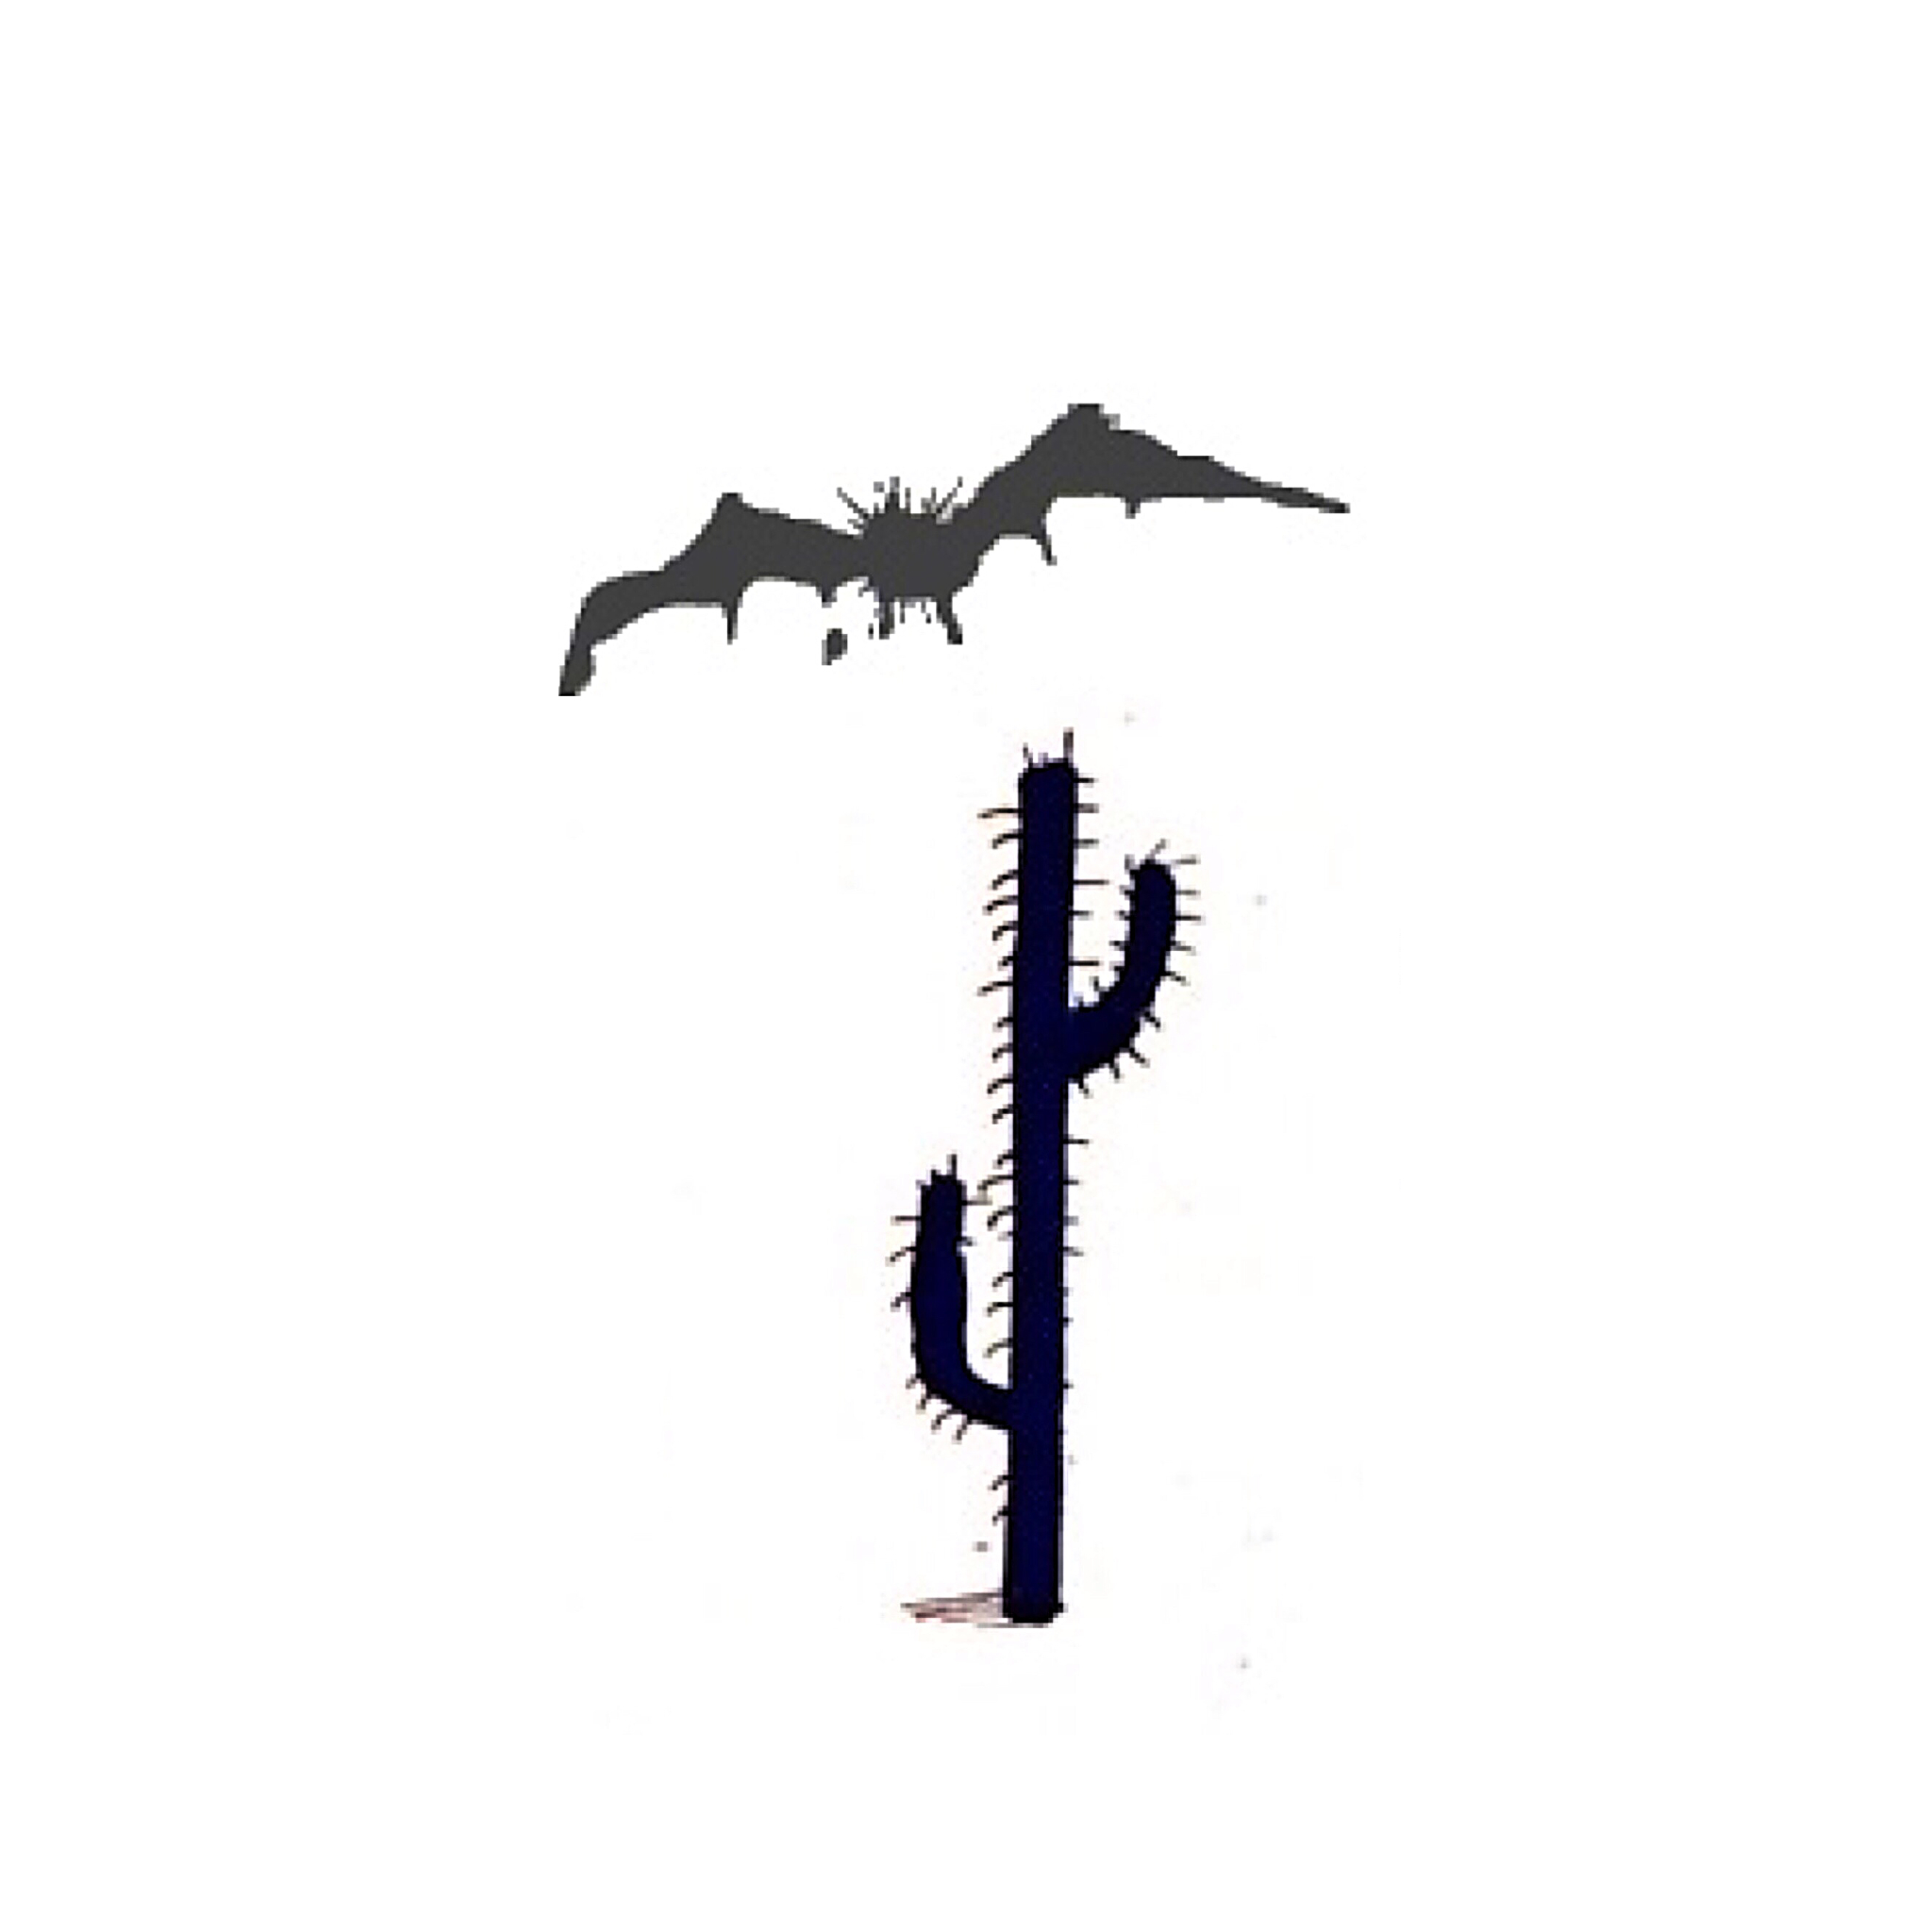 2048x2048 This cute little Ralph Steadman bat with his cactus, but maybe with the bat a little smaller and lower/closer to the cactus? Offset on w&acirc;&#128;&brvbar; | Ralph steadman, Ink, Art